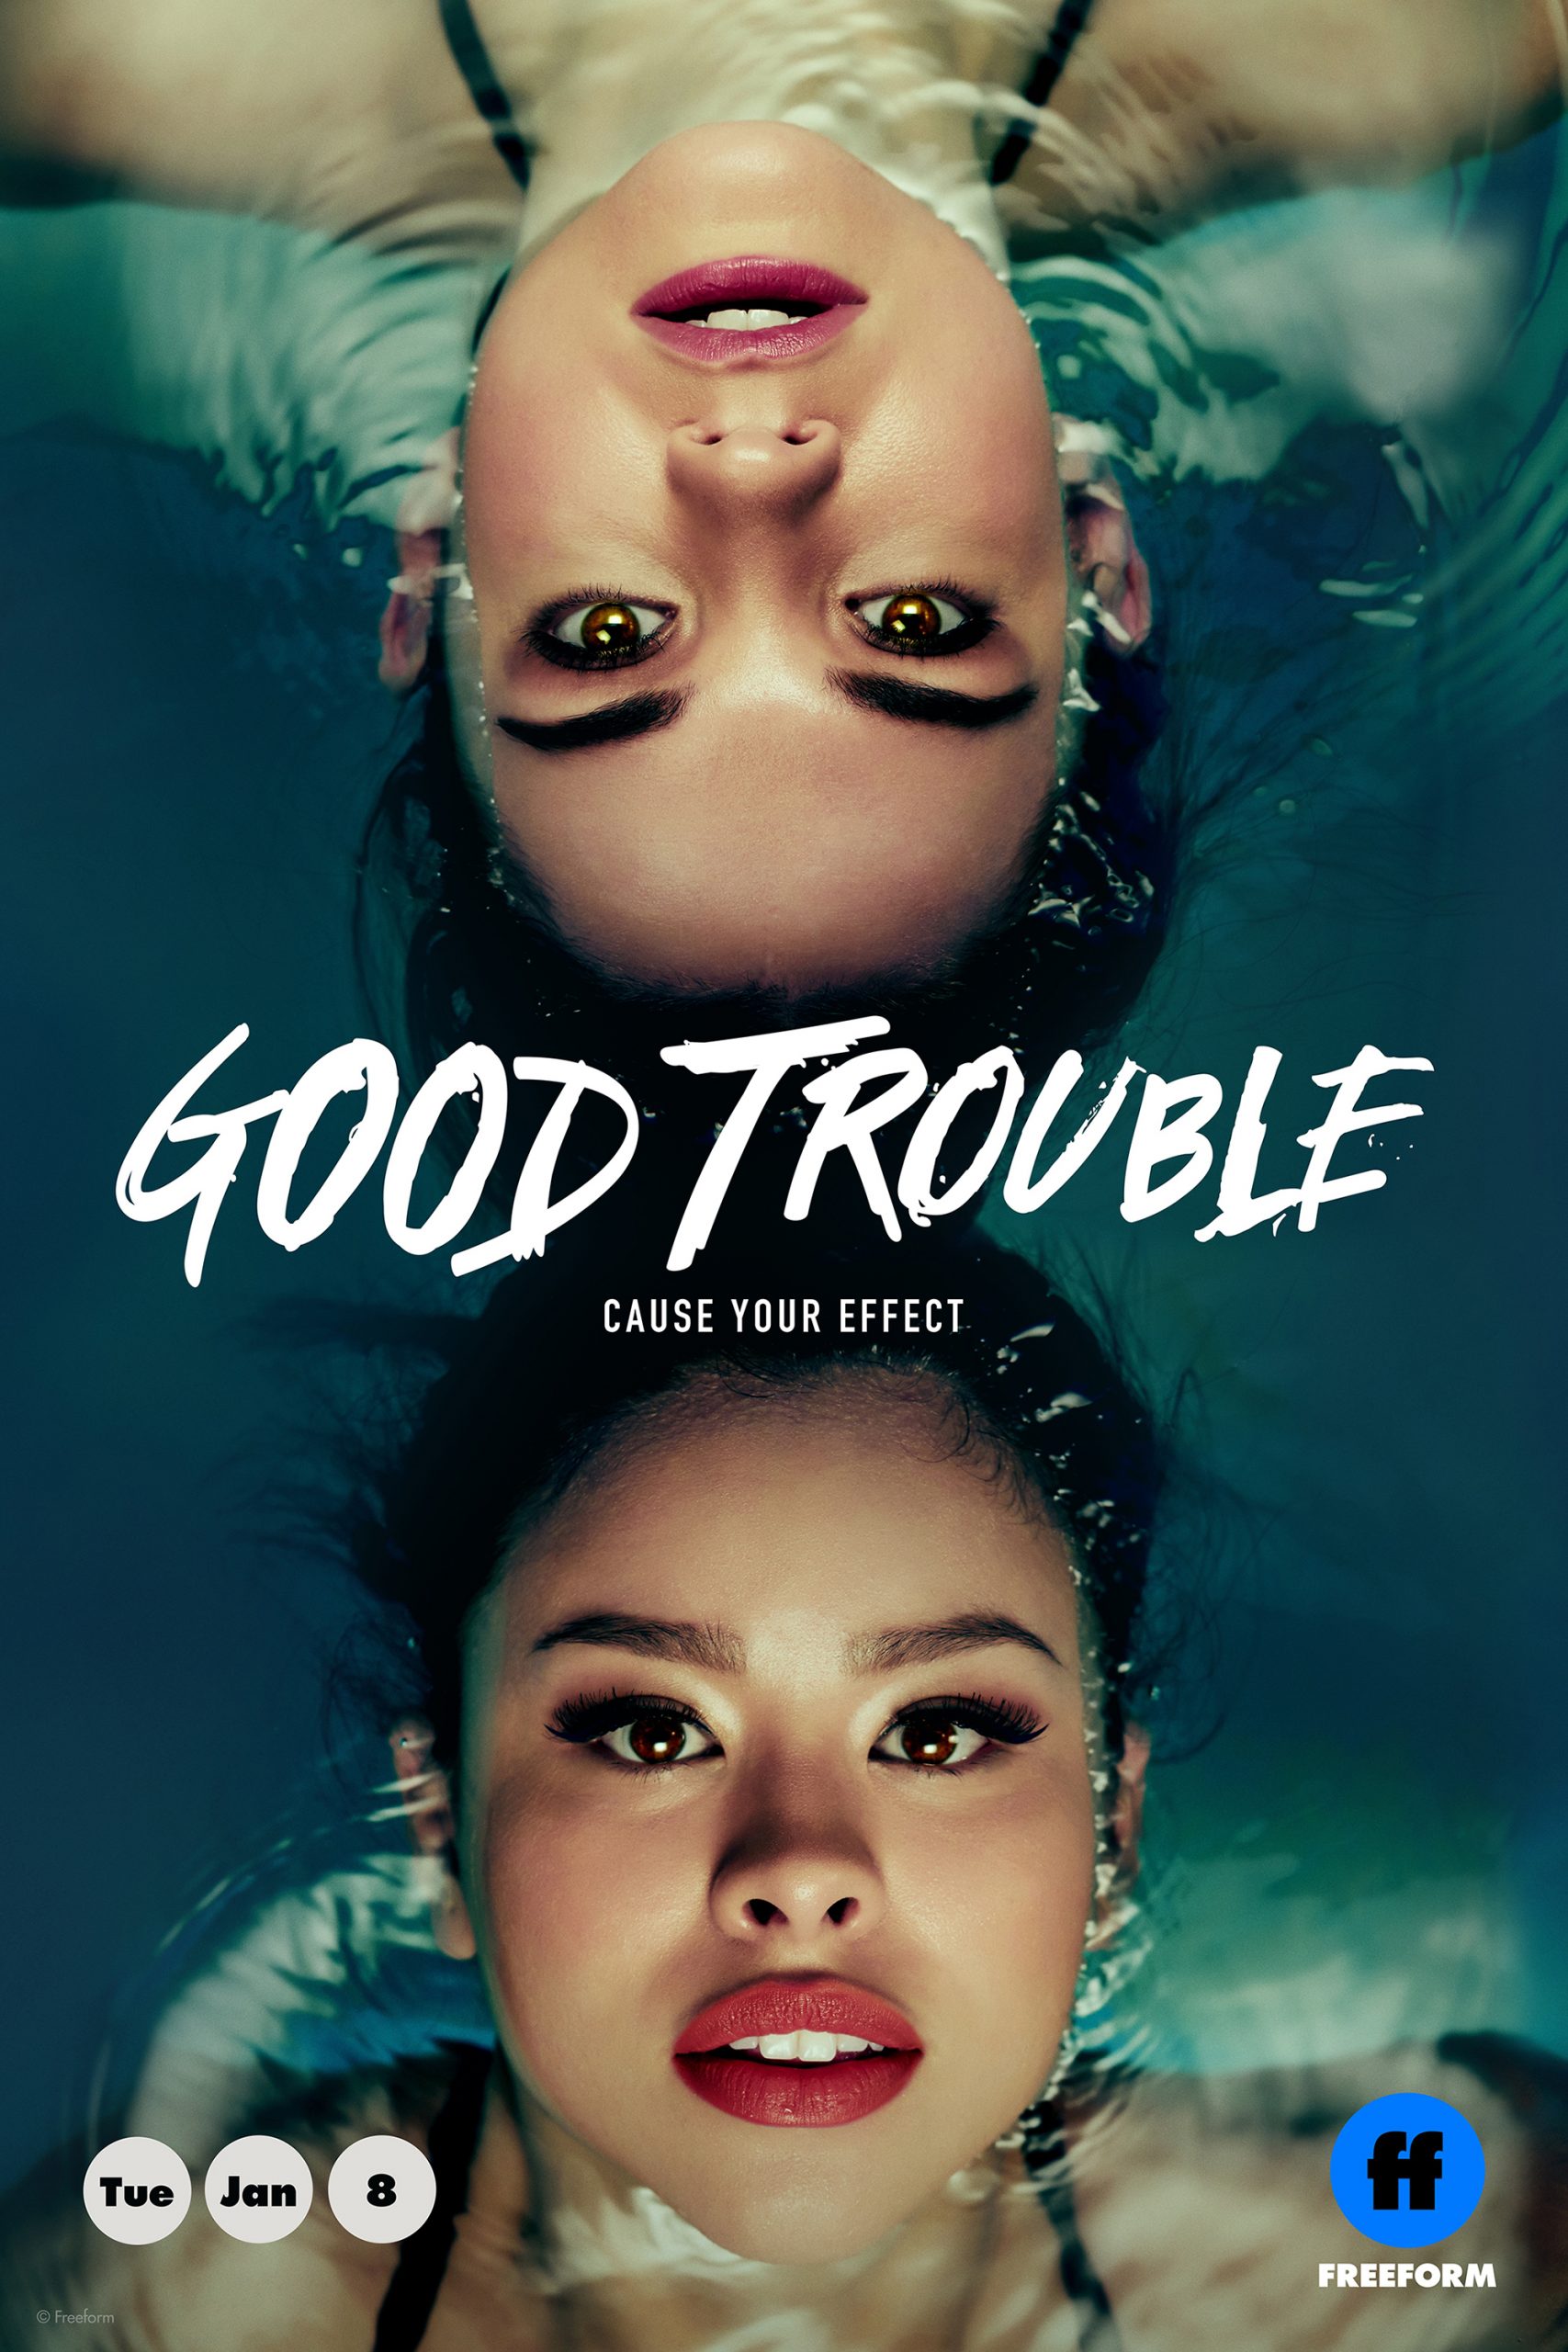 Serie Good Trouble